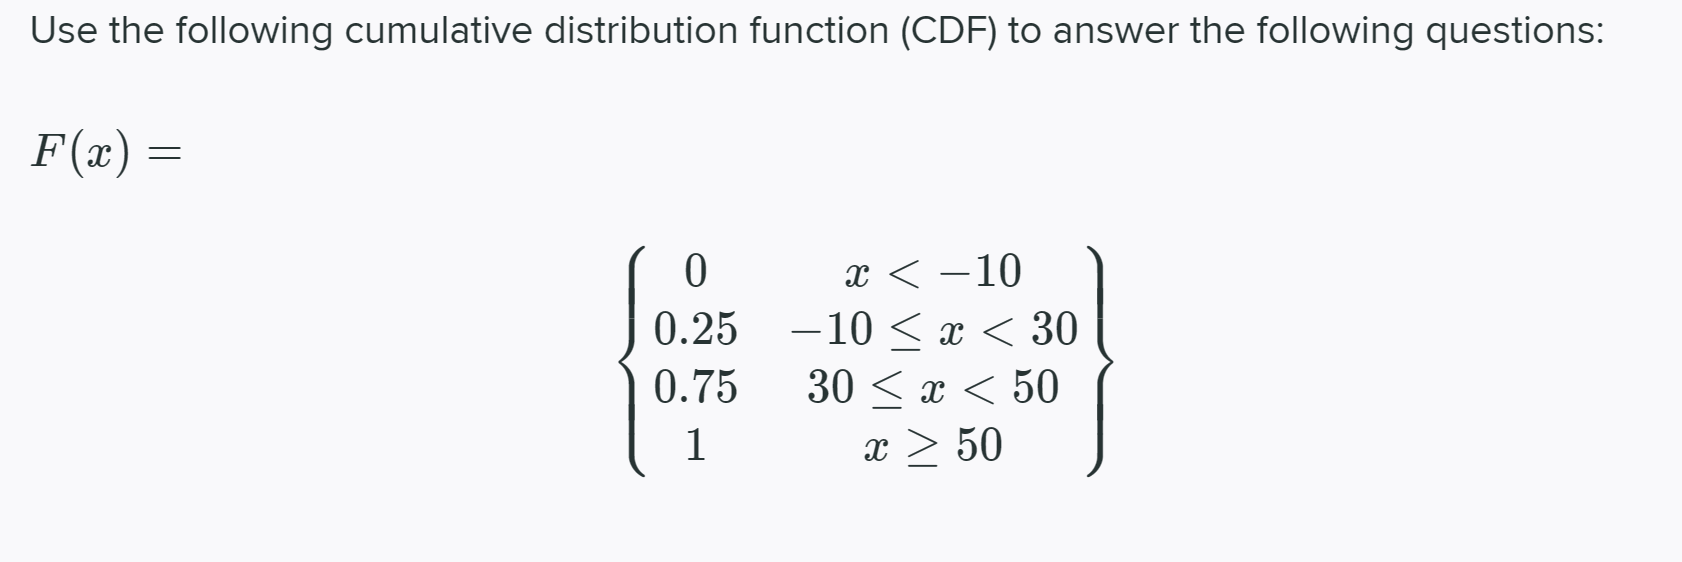 Use The Following Cumulative Distribution Function Cdf To Answer The Following Questions F X 0 0 25 0 75 1 X 1